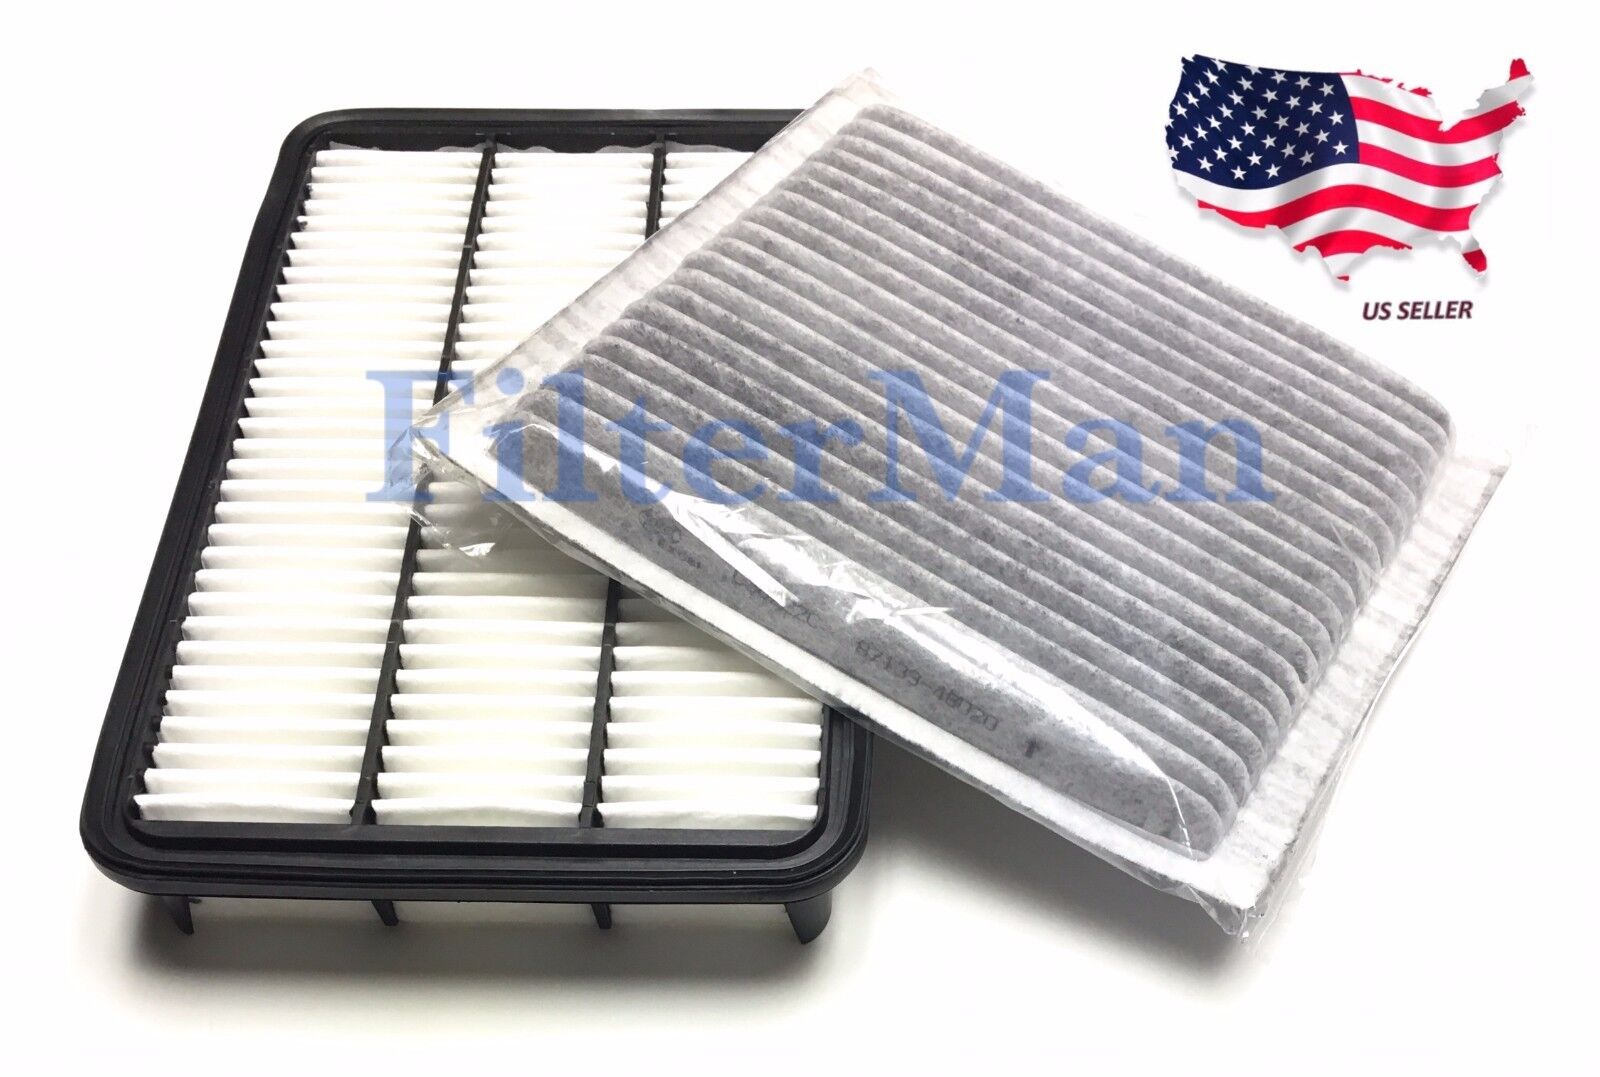 Engine Air Filter & Carbonized Cabin Air Filter For Lexus RX300 99-03 US Seller